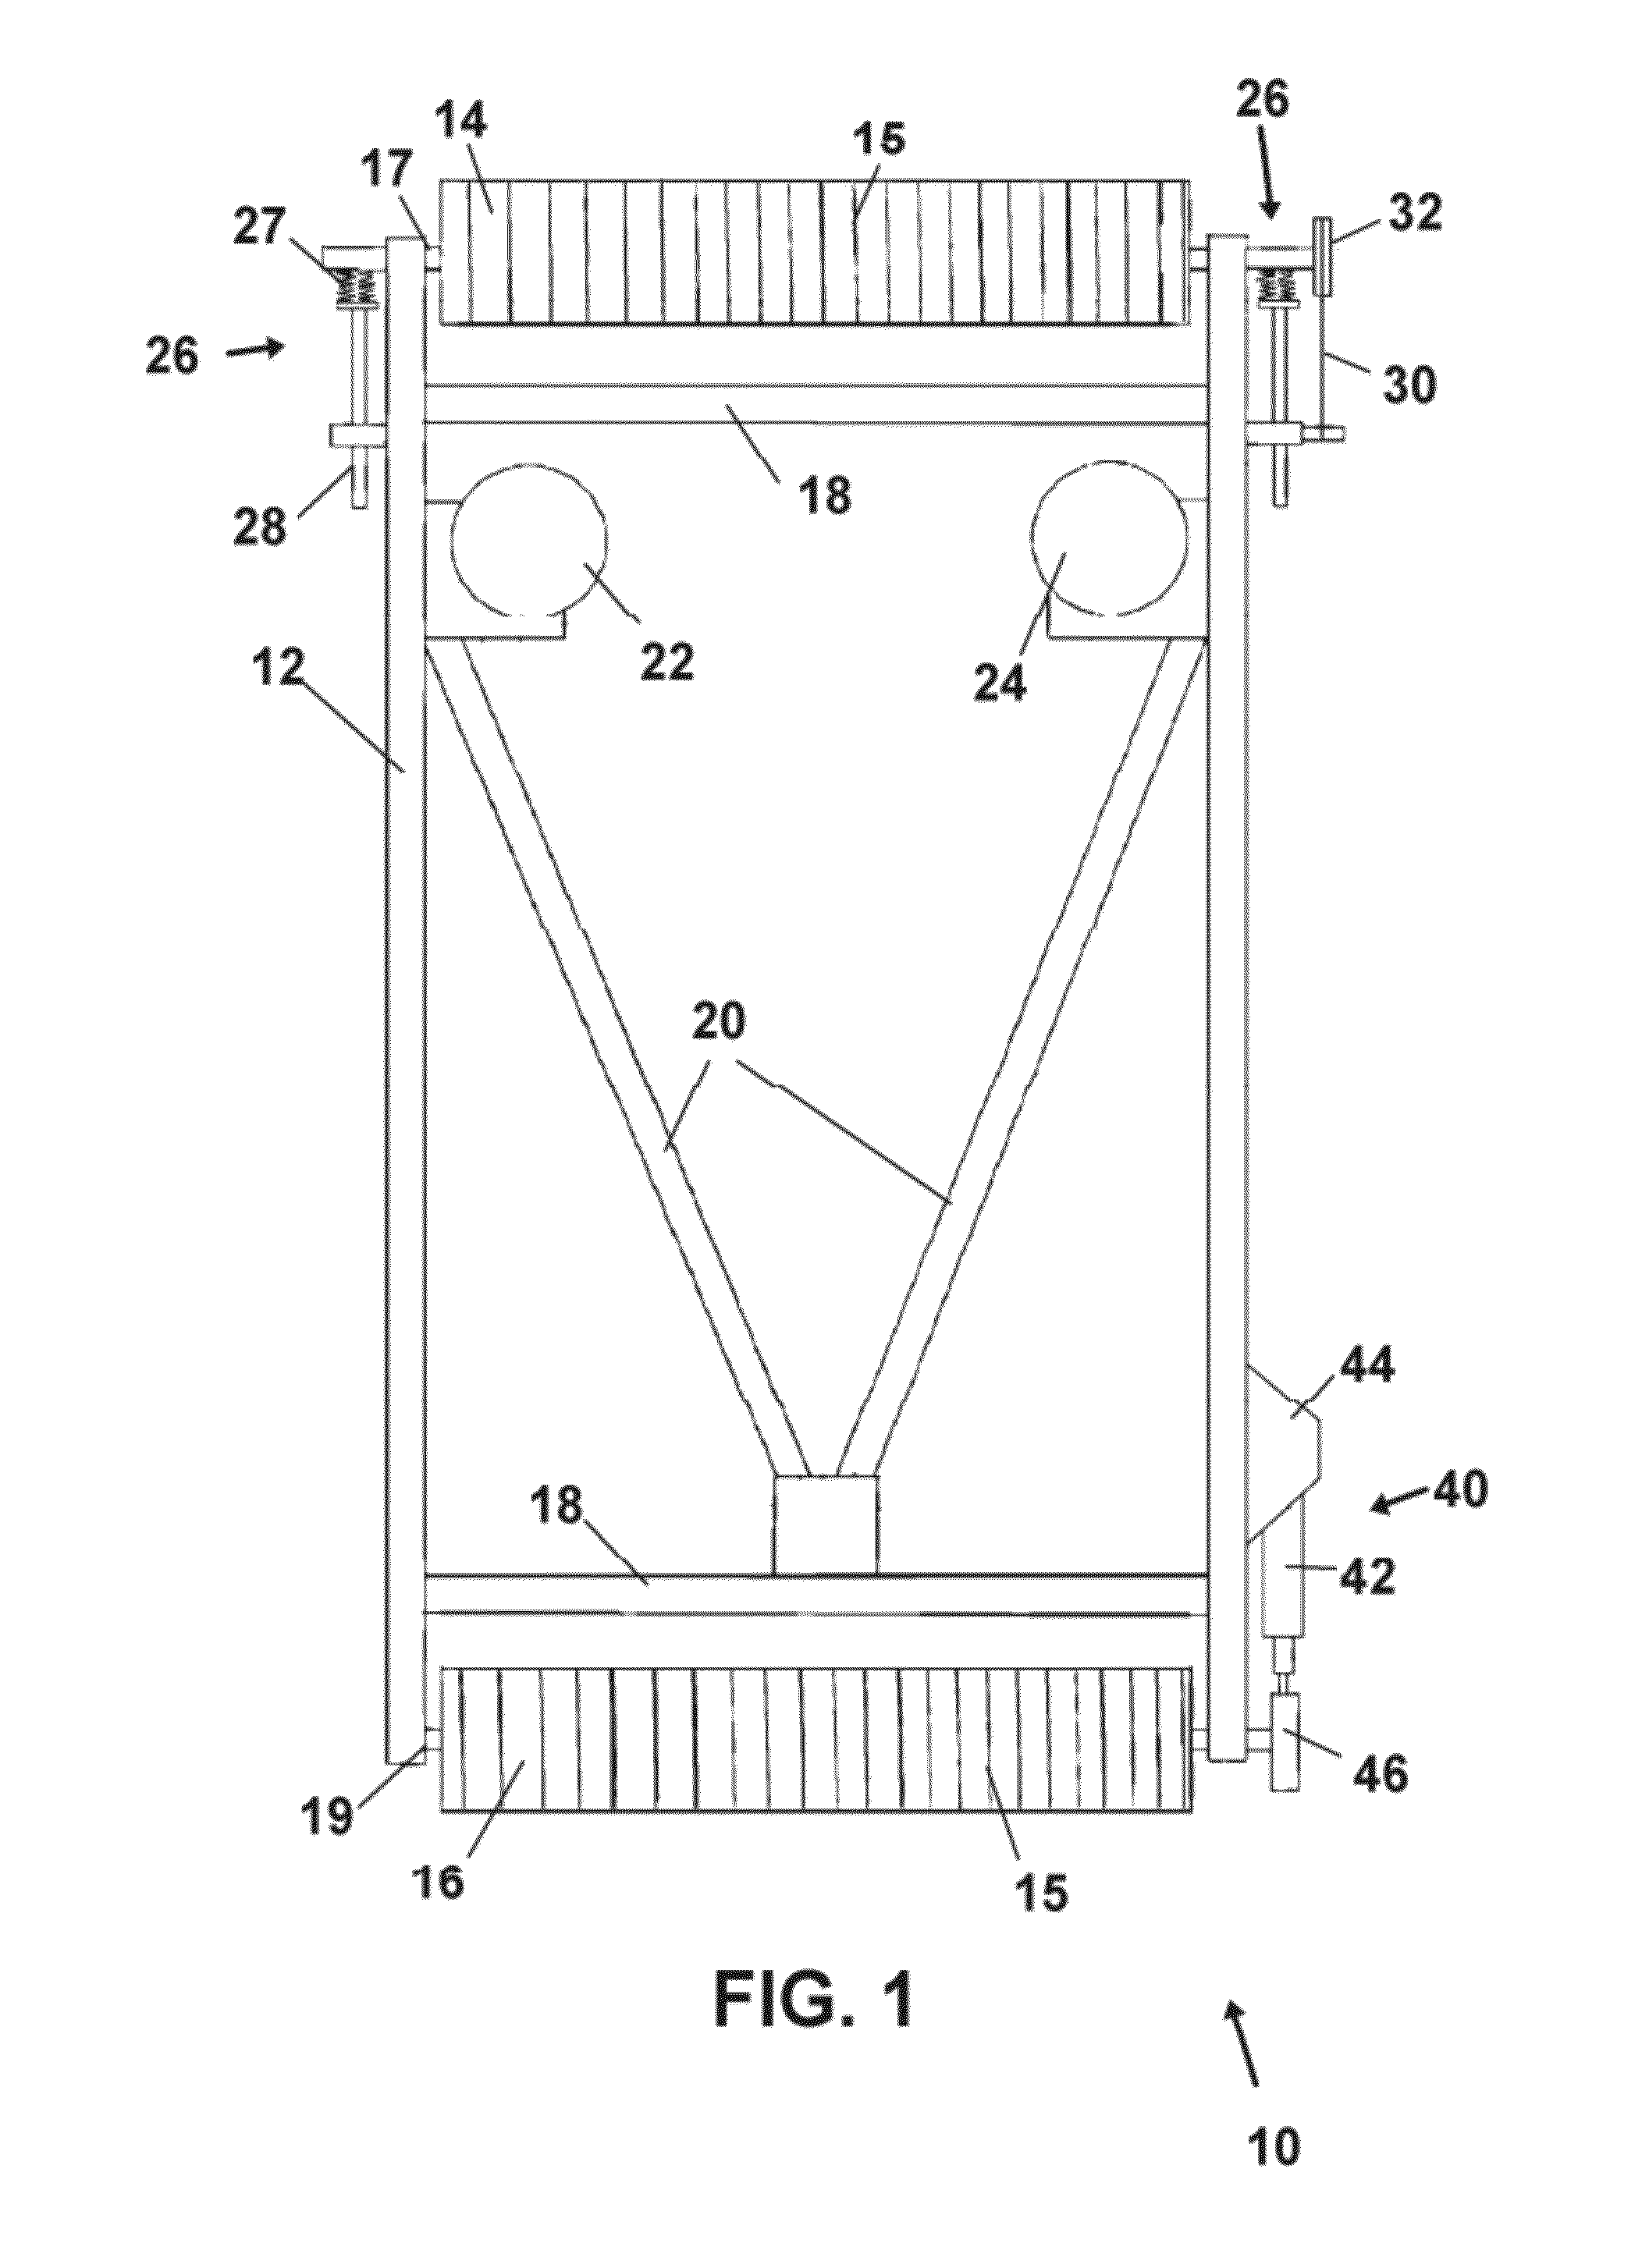 Continuous-Wire Transport Conveyor for Food Dehydration